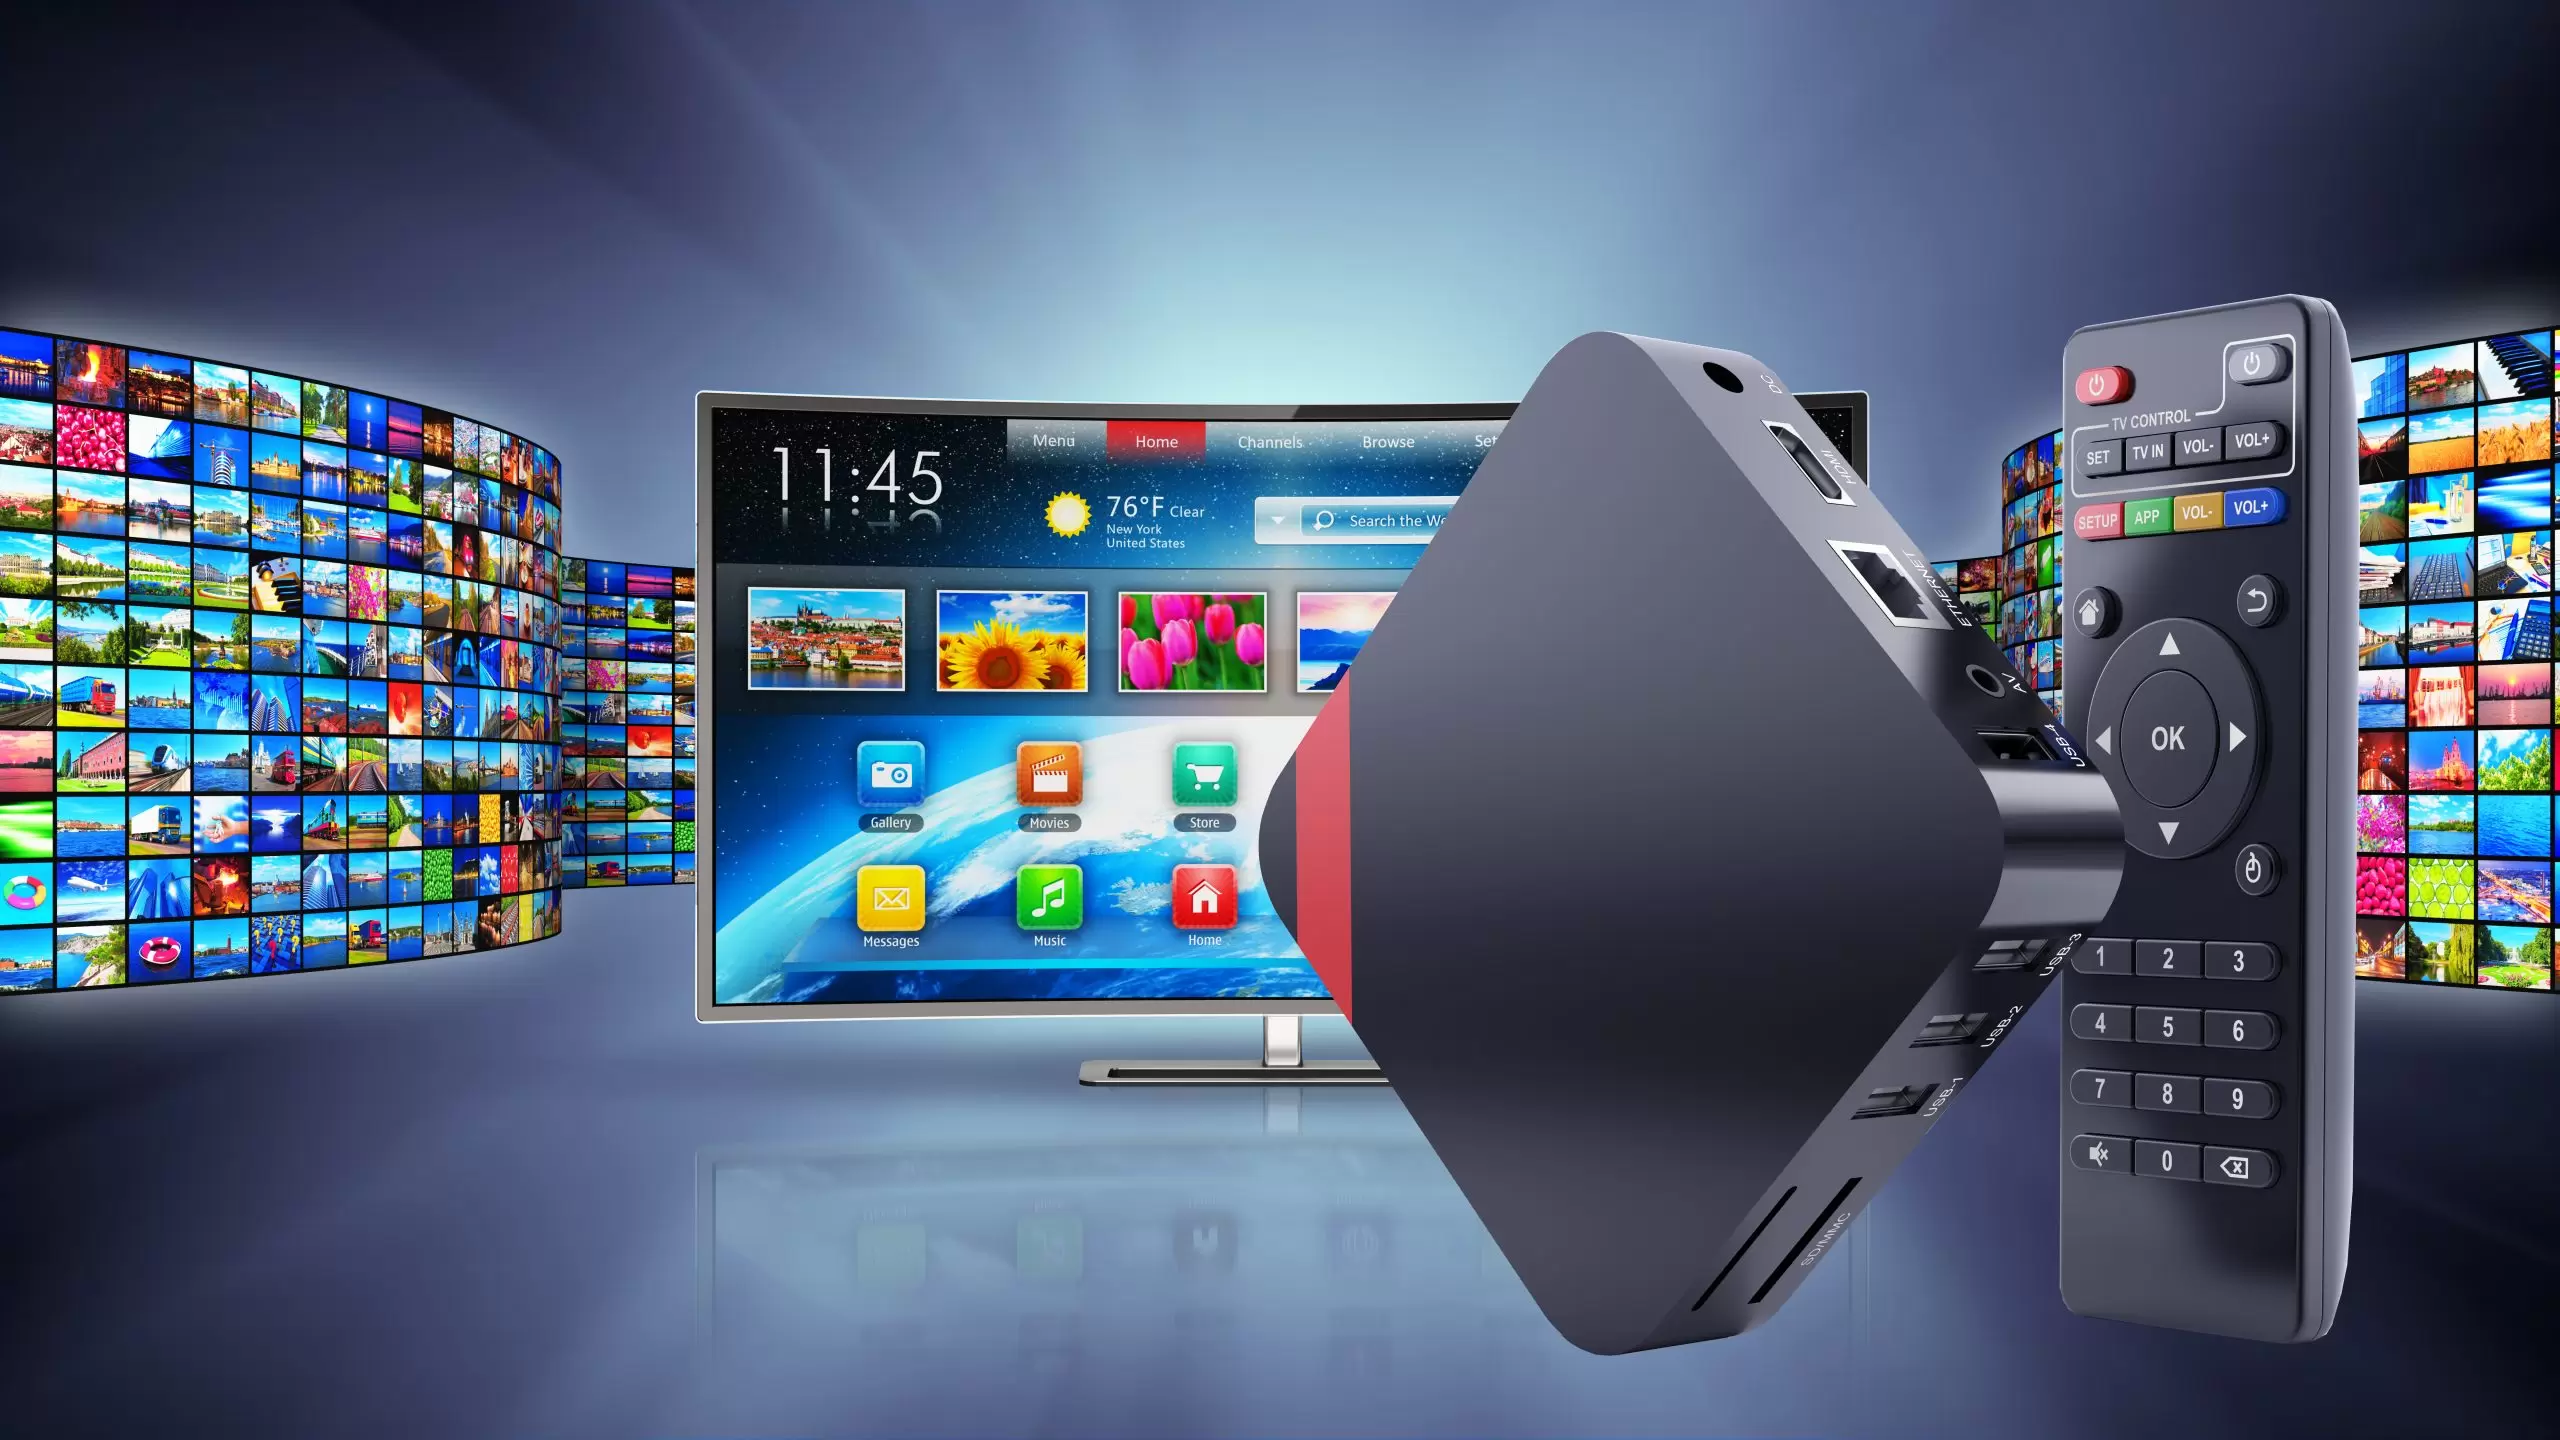 Cheap Android TV boxes – are they worth it?